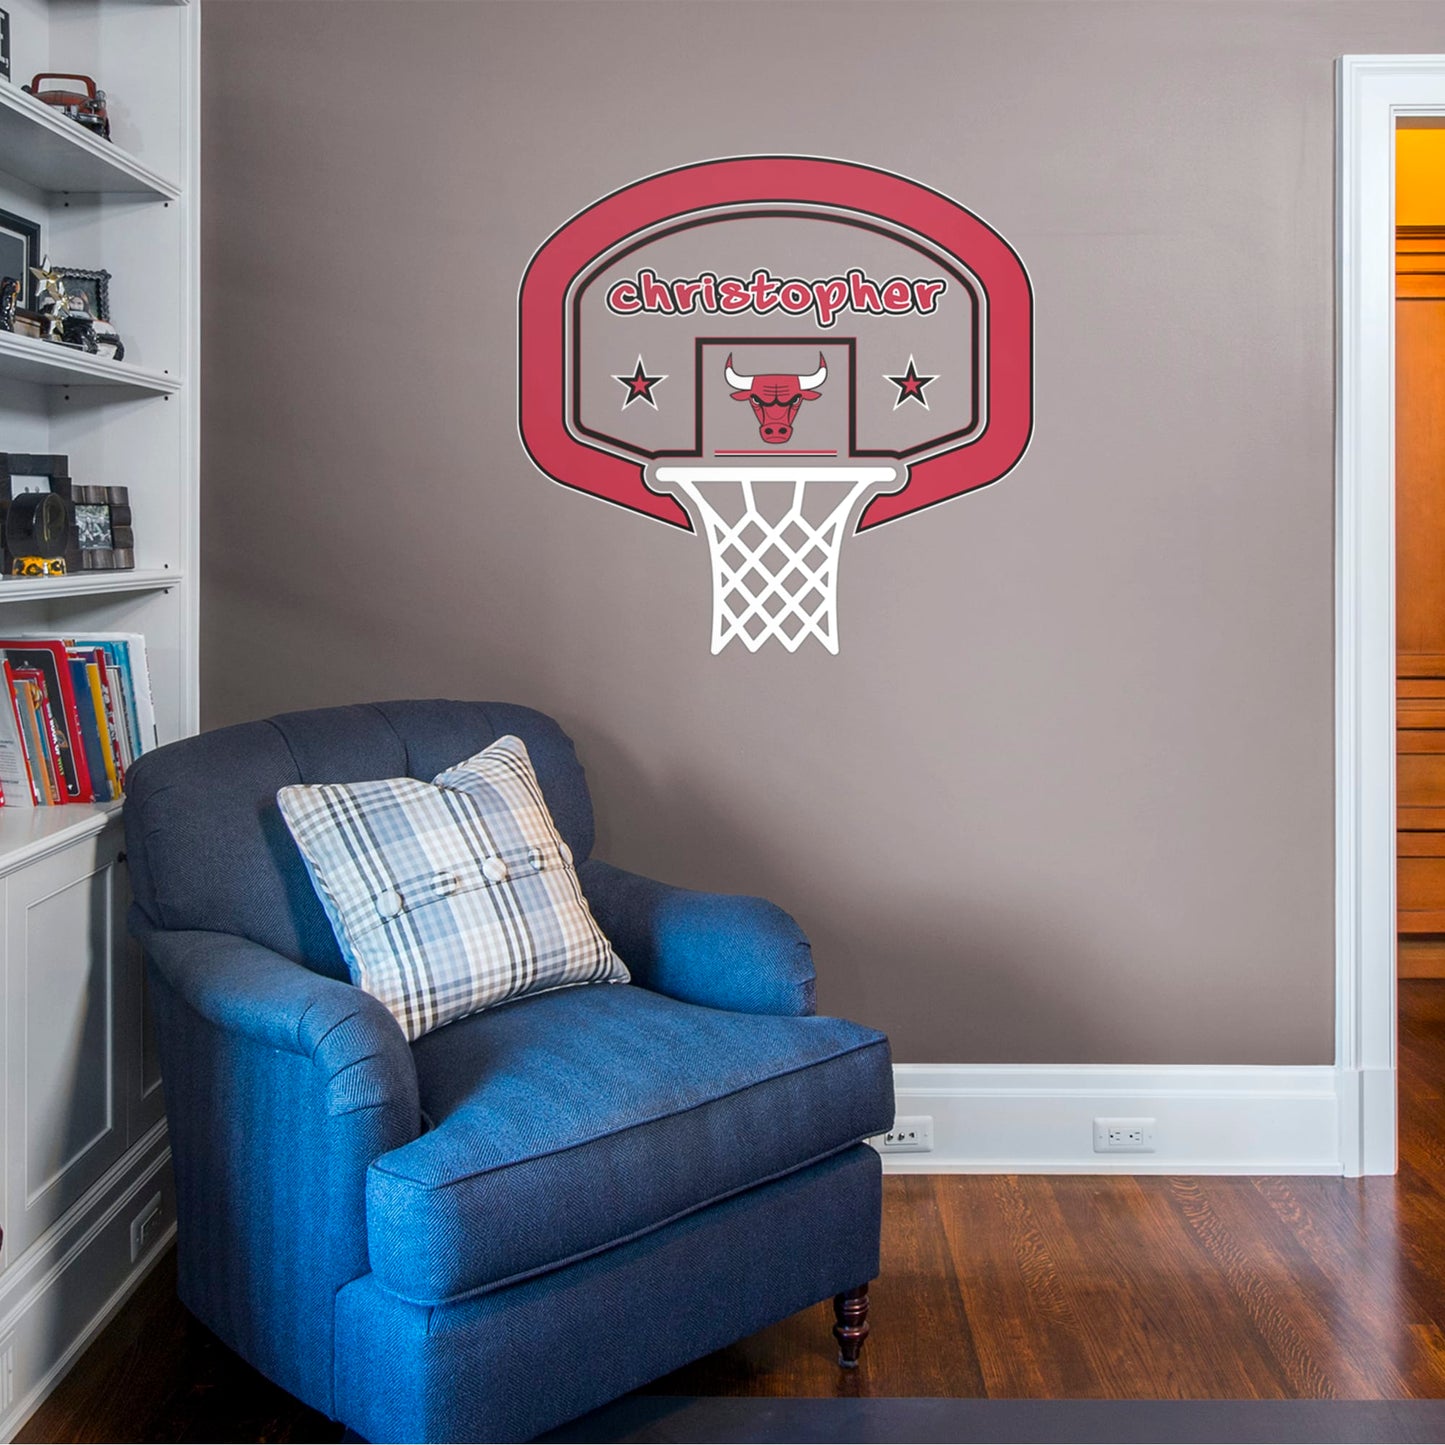 Chicago Bulls: Personalized Name - Officially Licensed NBA Transfer Decal